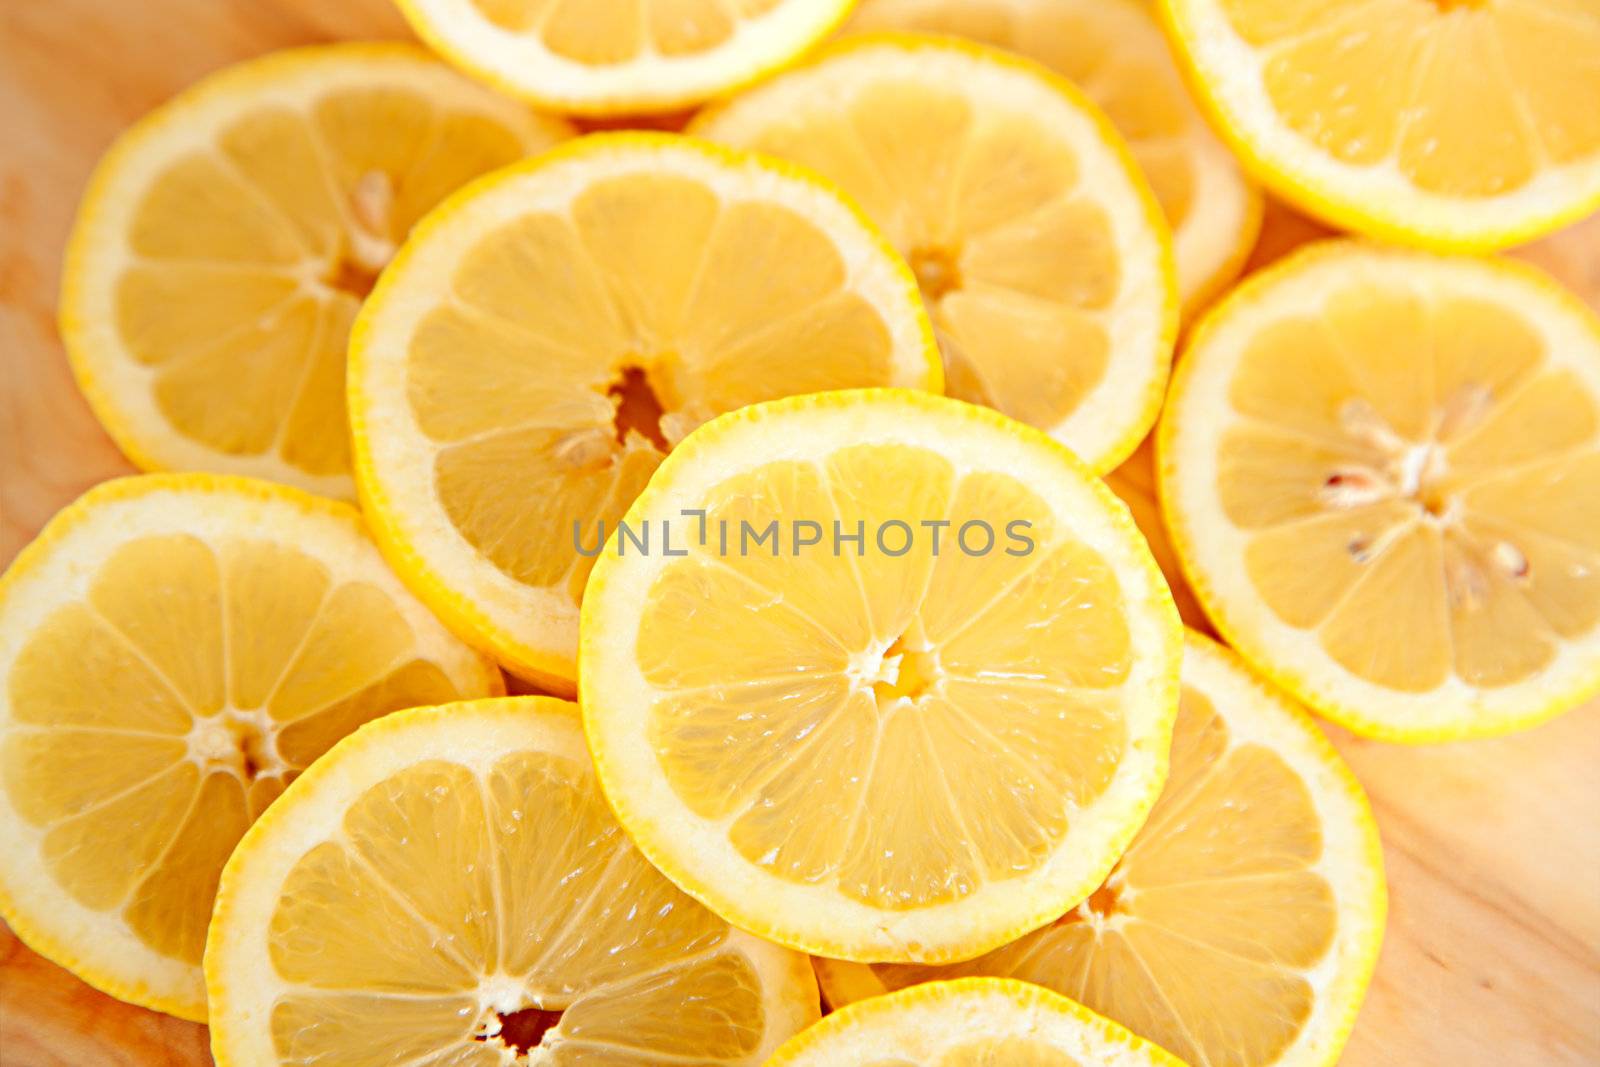 Abstract background with citrus-fruit of lemon slices